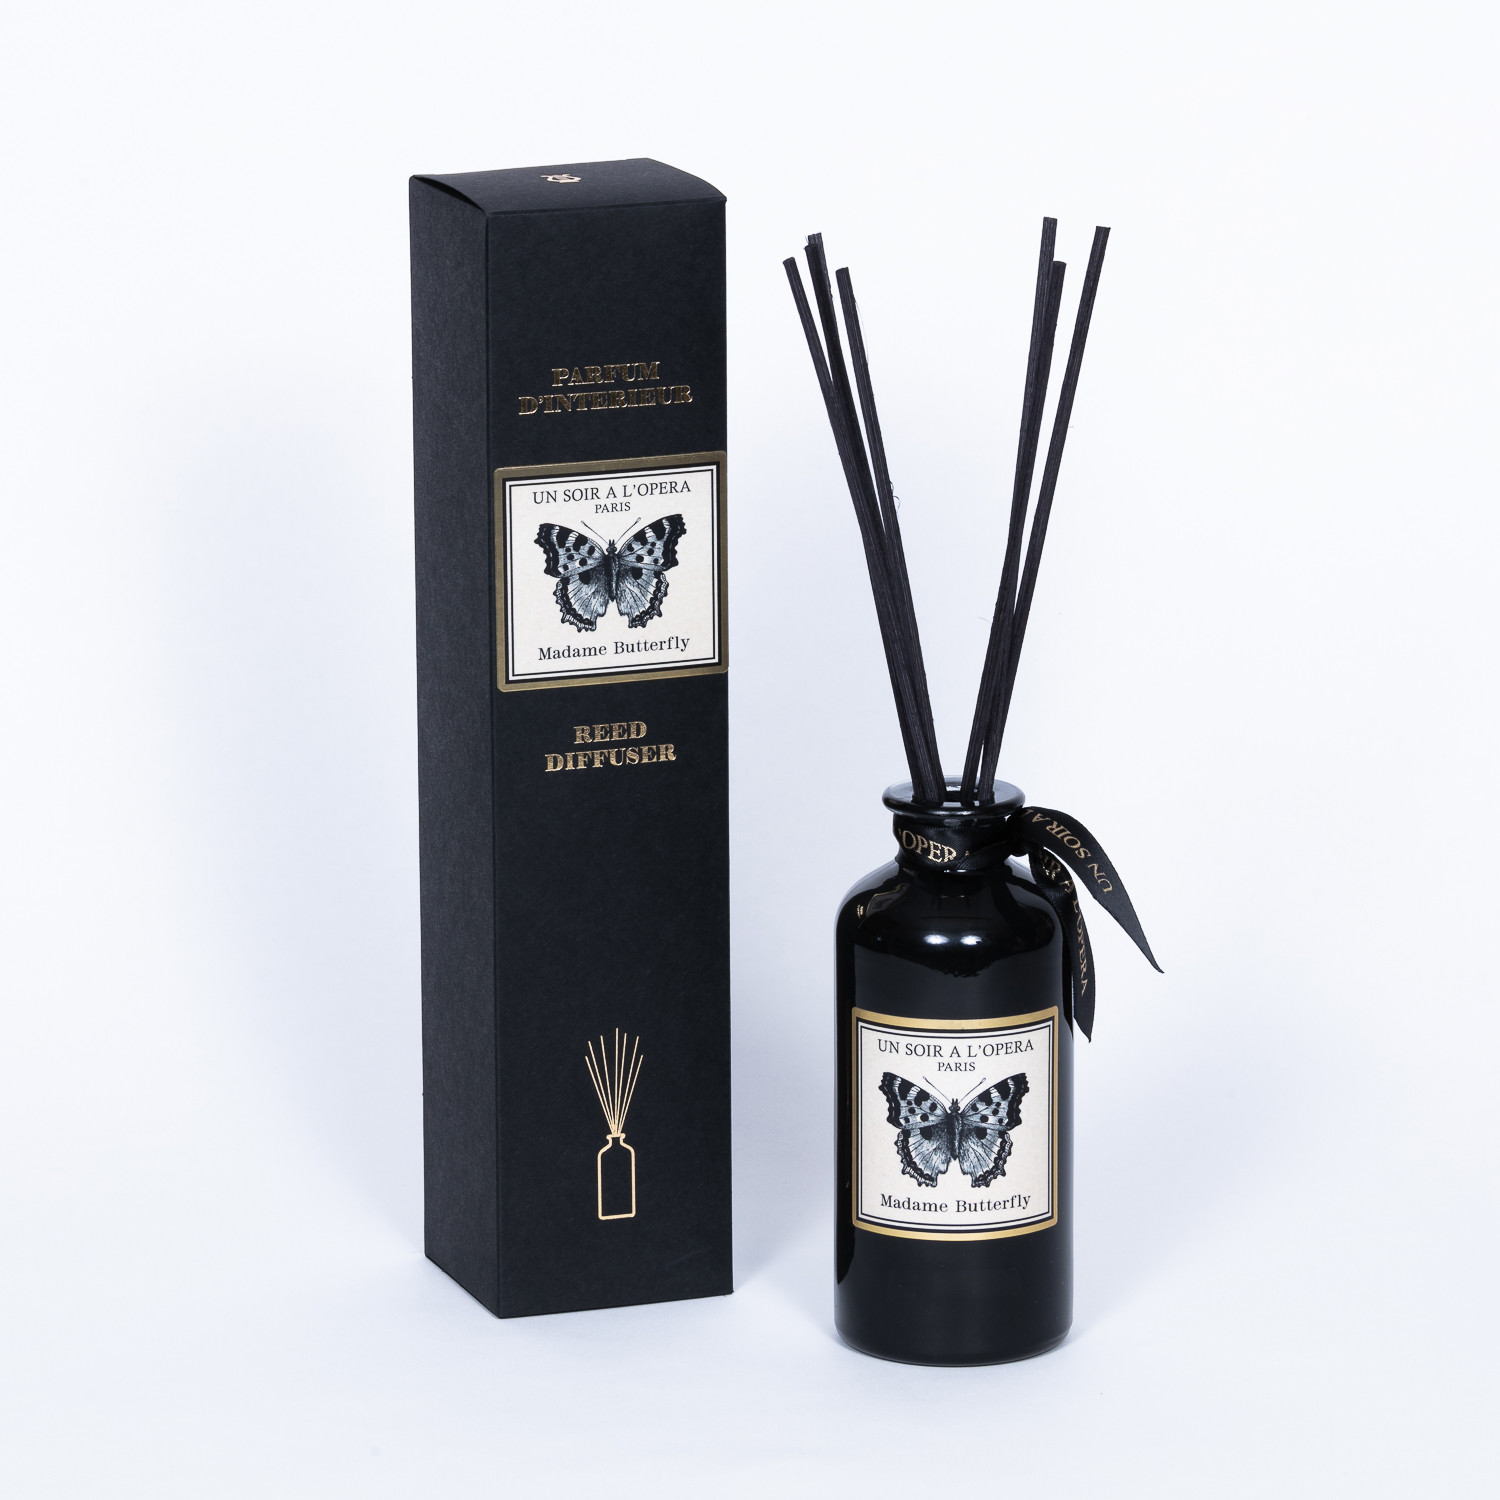 MADAMA BUTTERFLY - Home reed diffuser